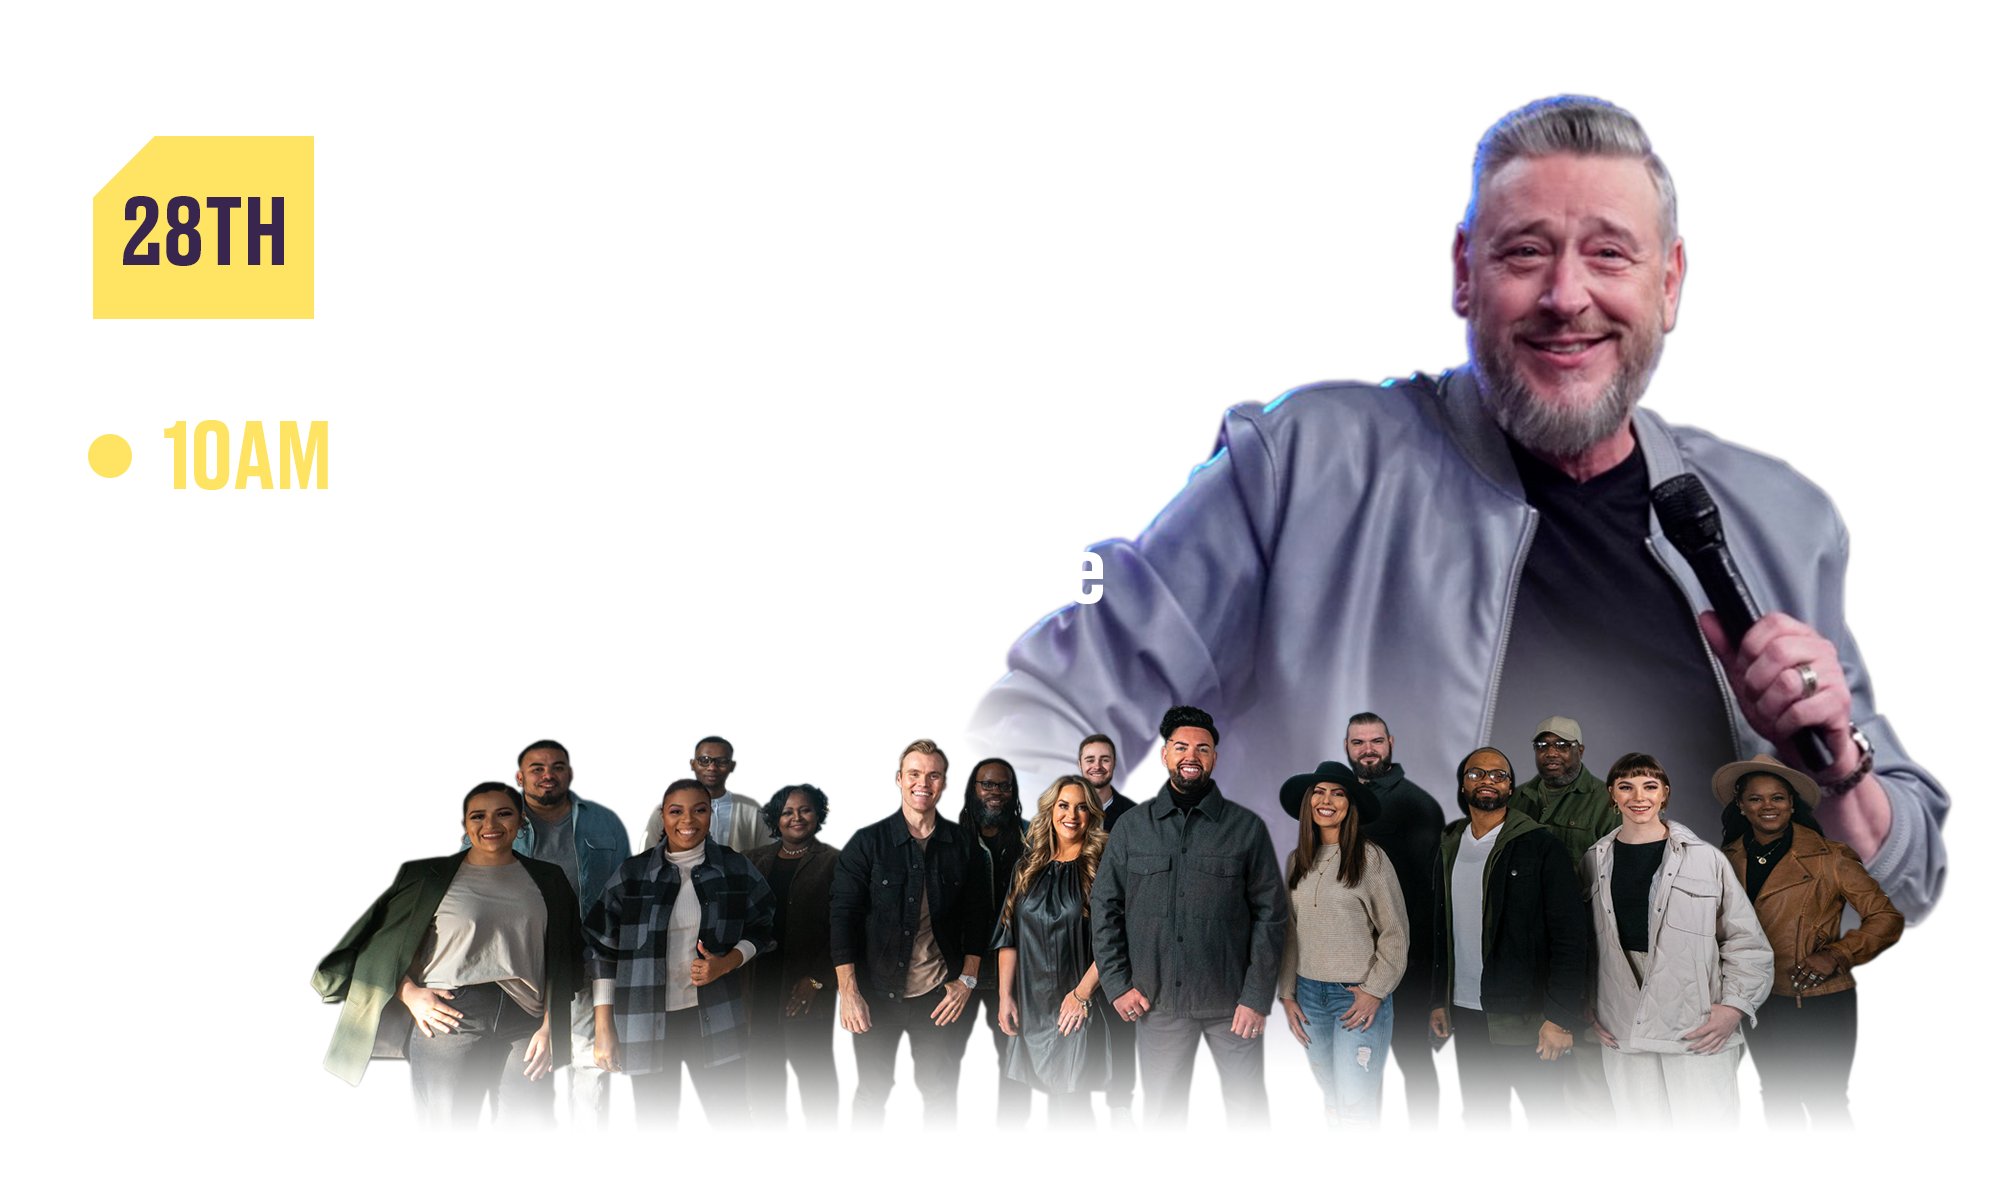 28th Sunday Morning 7PM With Dr. Rod Parsley and Harvest Music Live